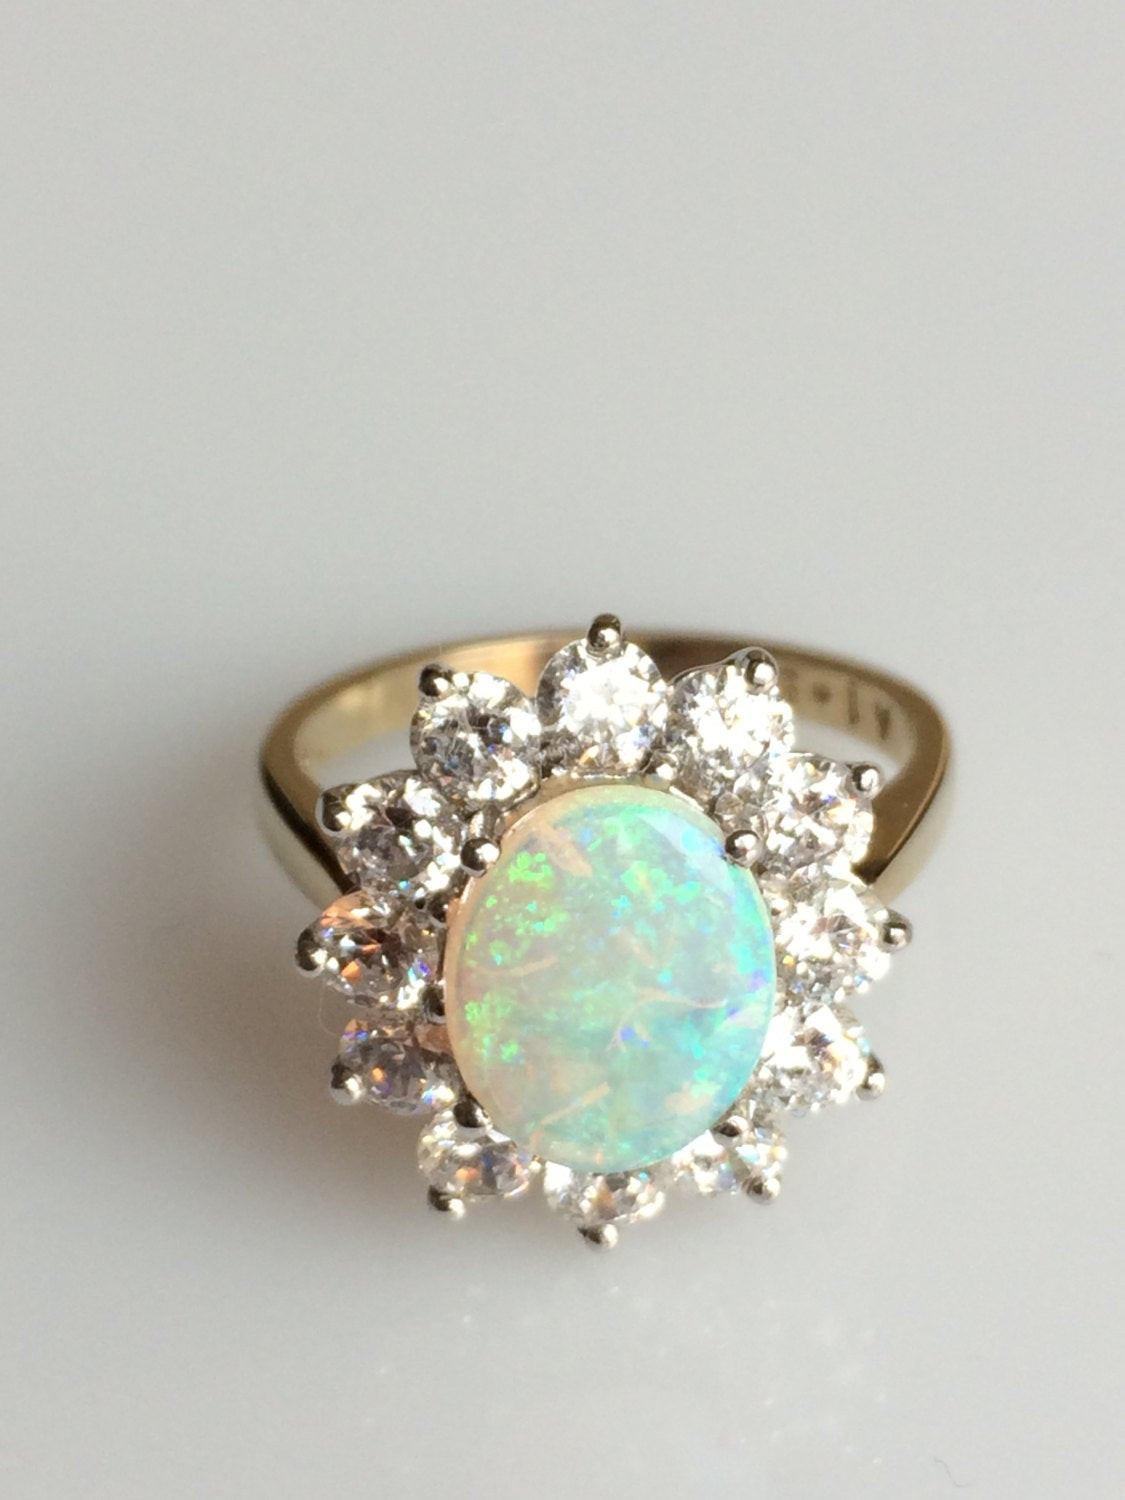 Opal And Diamond Engagement Ring
 Gold Opal Engagement Ring Diamond and Opal Ring by ArahJames